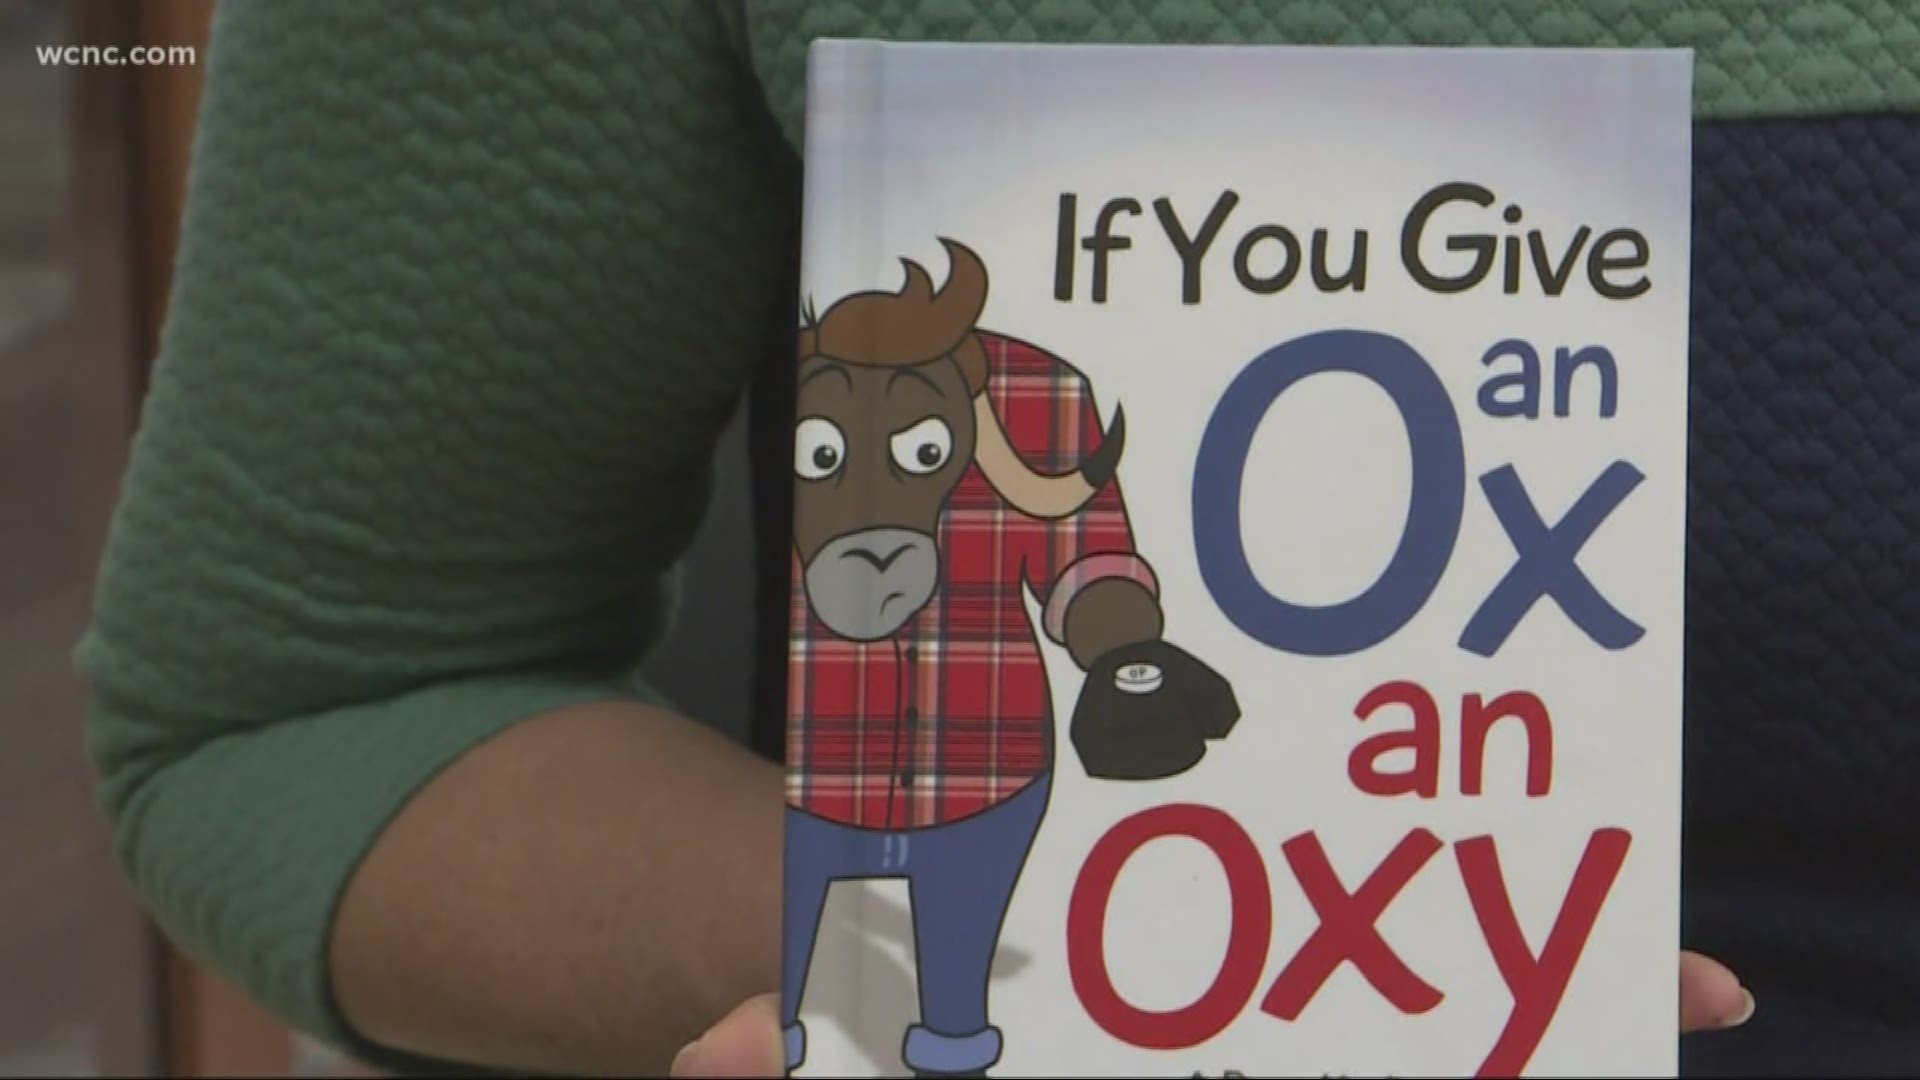 "If You Give an Ox an Oxy" expands on the concept of the literary classic, "If You Give a Mouse a Cookie."